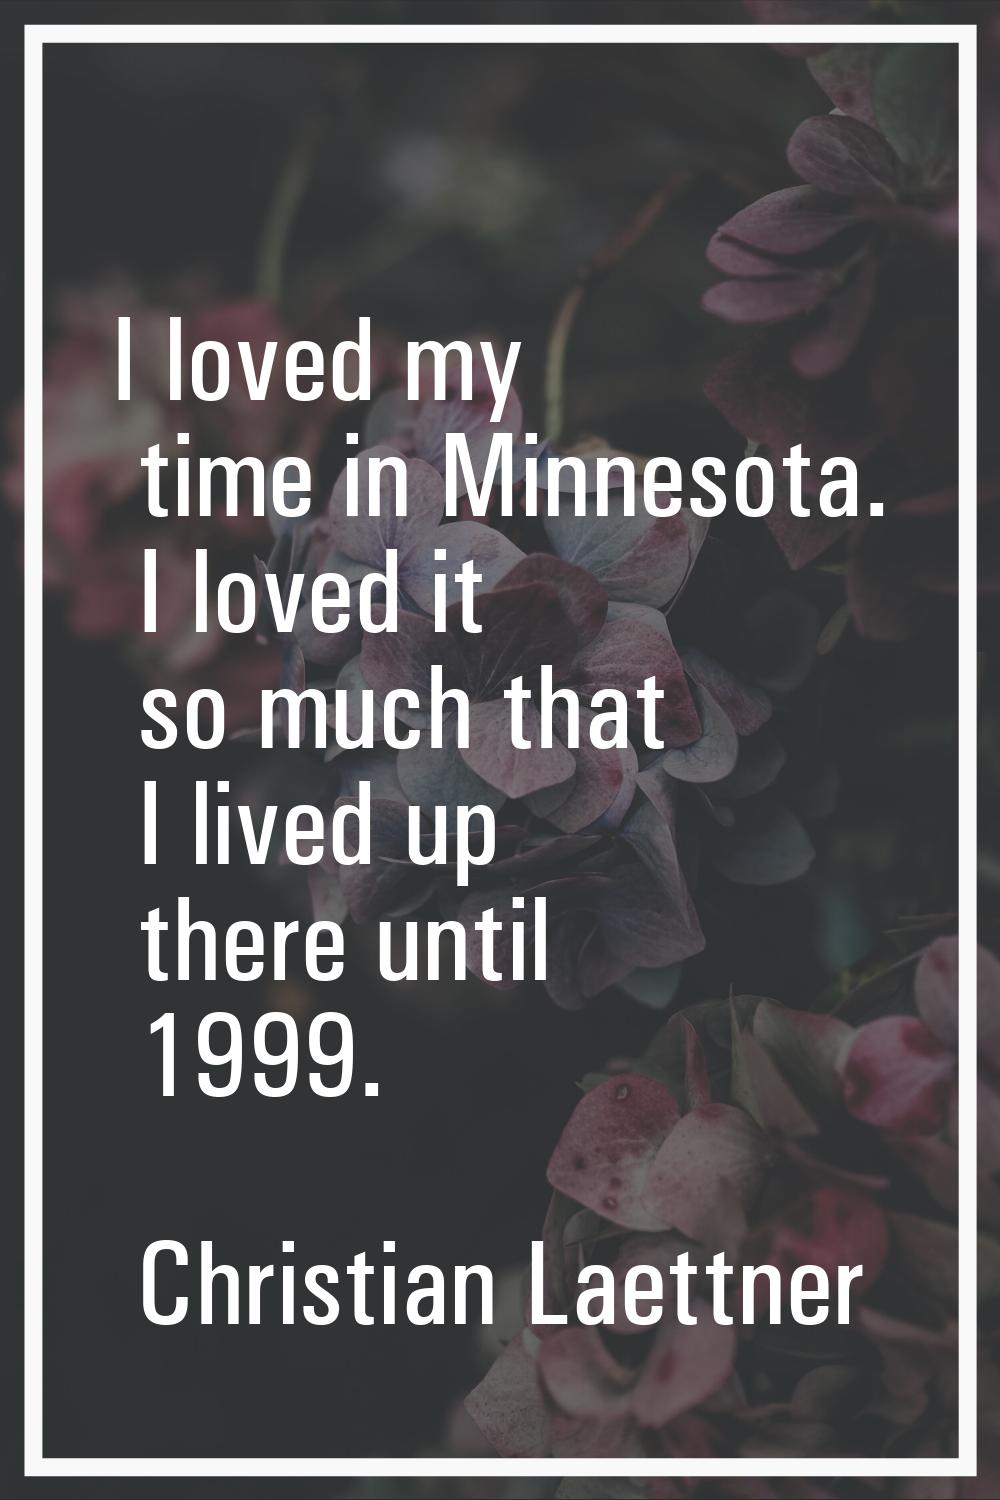 I loved my time in Minnesota. I loved it so much that I lived up there until 1999.